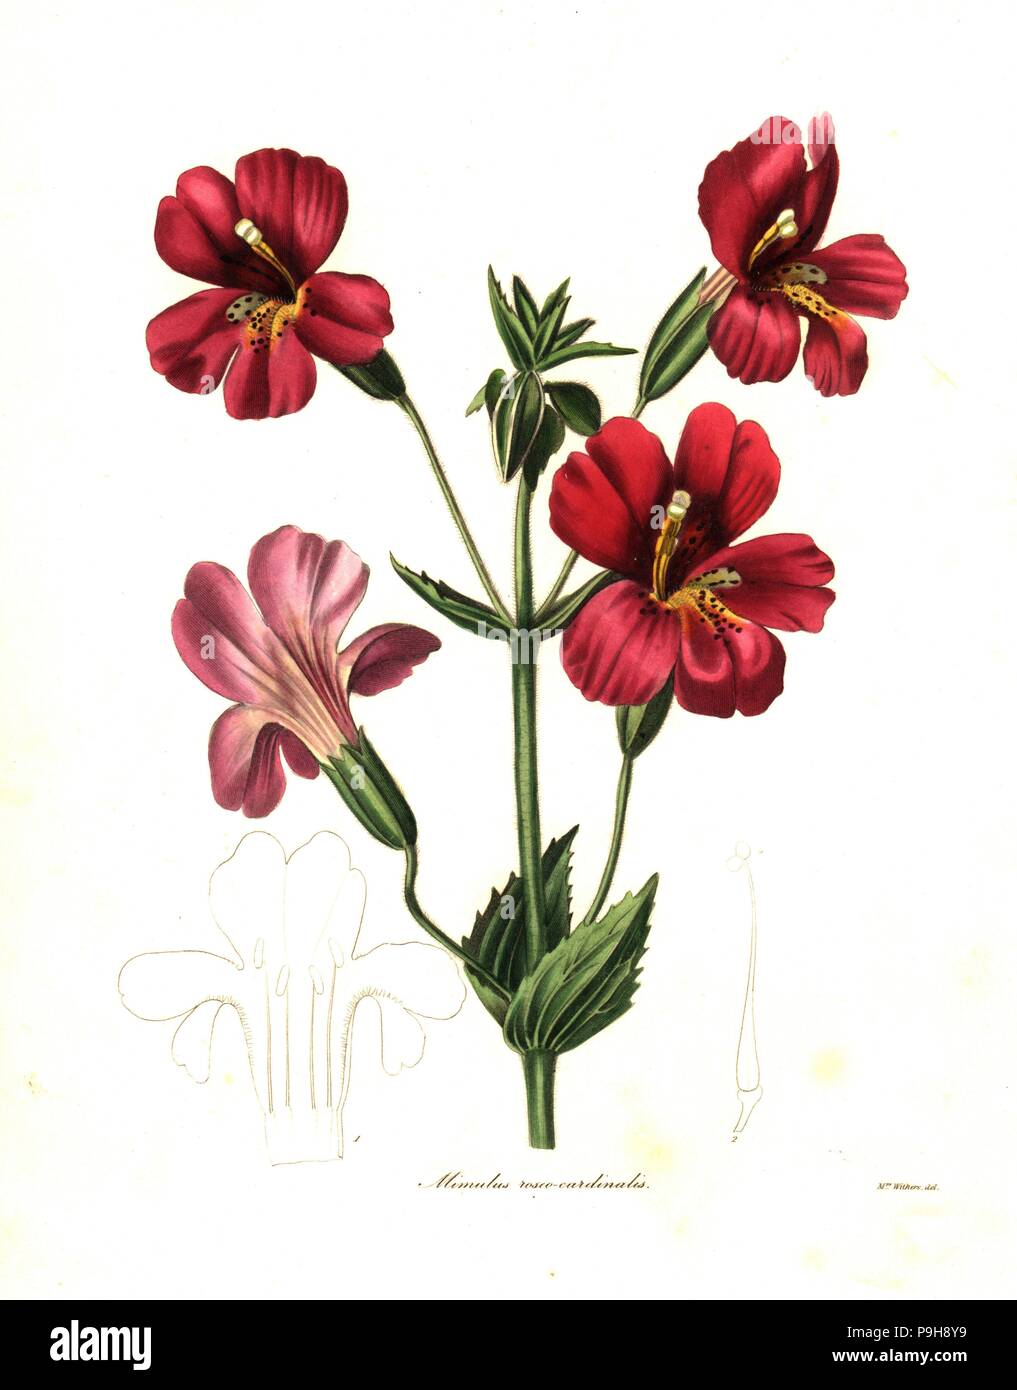 Scarlet monkeyflower or cardinal monkey flower, Mimulus cardinalis. Handcoloured copperplate engraving after a botanical illustration by Mrs Augusta Withers from Benjamin Maund and the Rev. John Stevens Henslow's The Botanist, London, 1836. Stock Photo